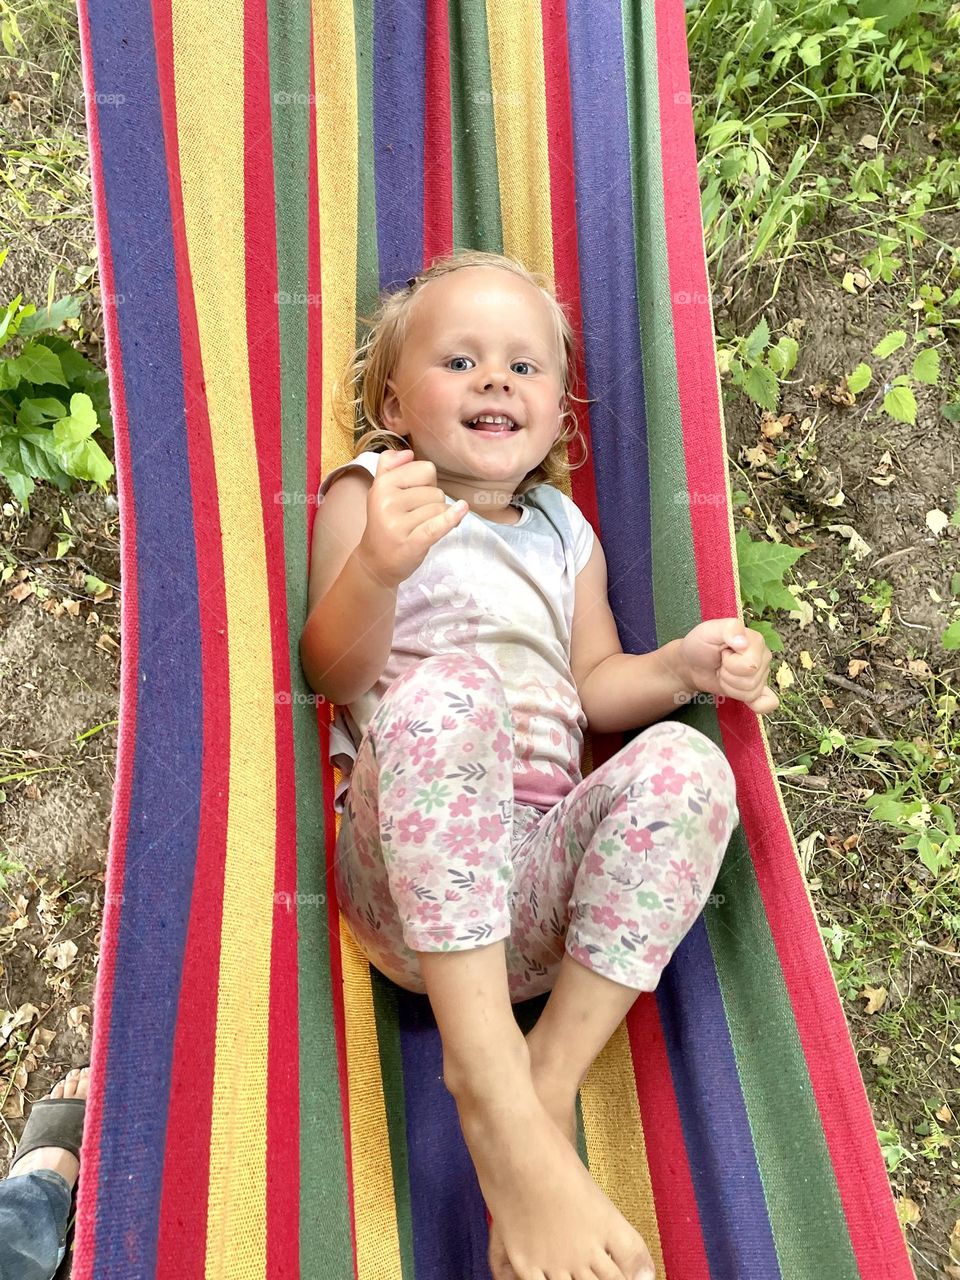 Baby girl in a hammock during sunny summer day.